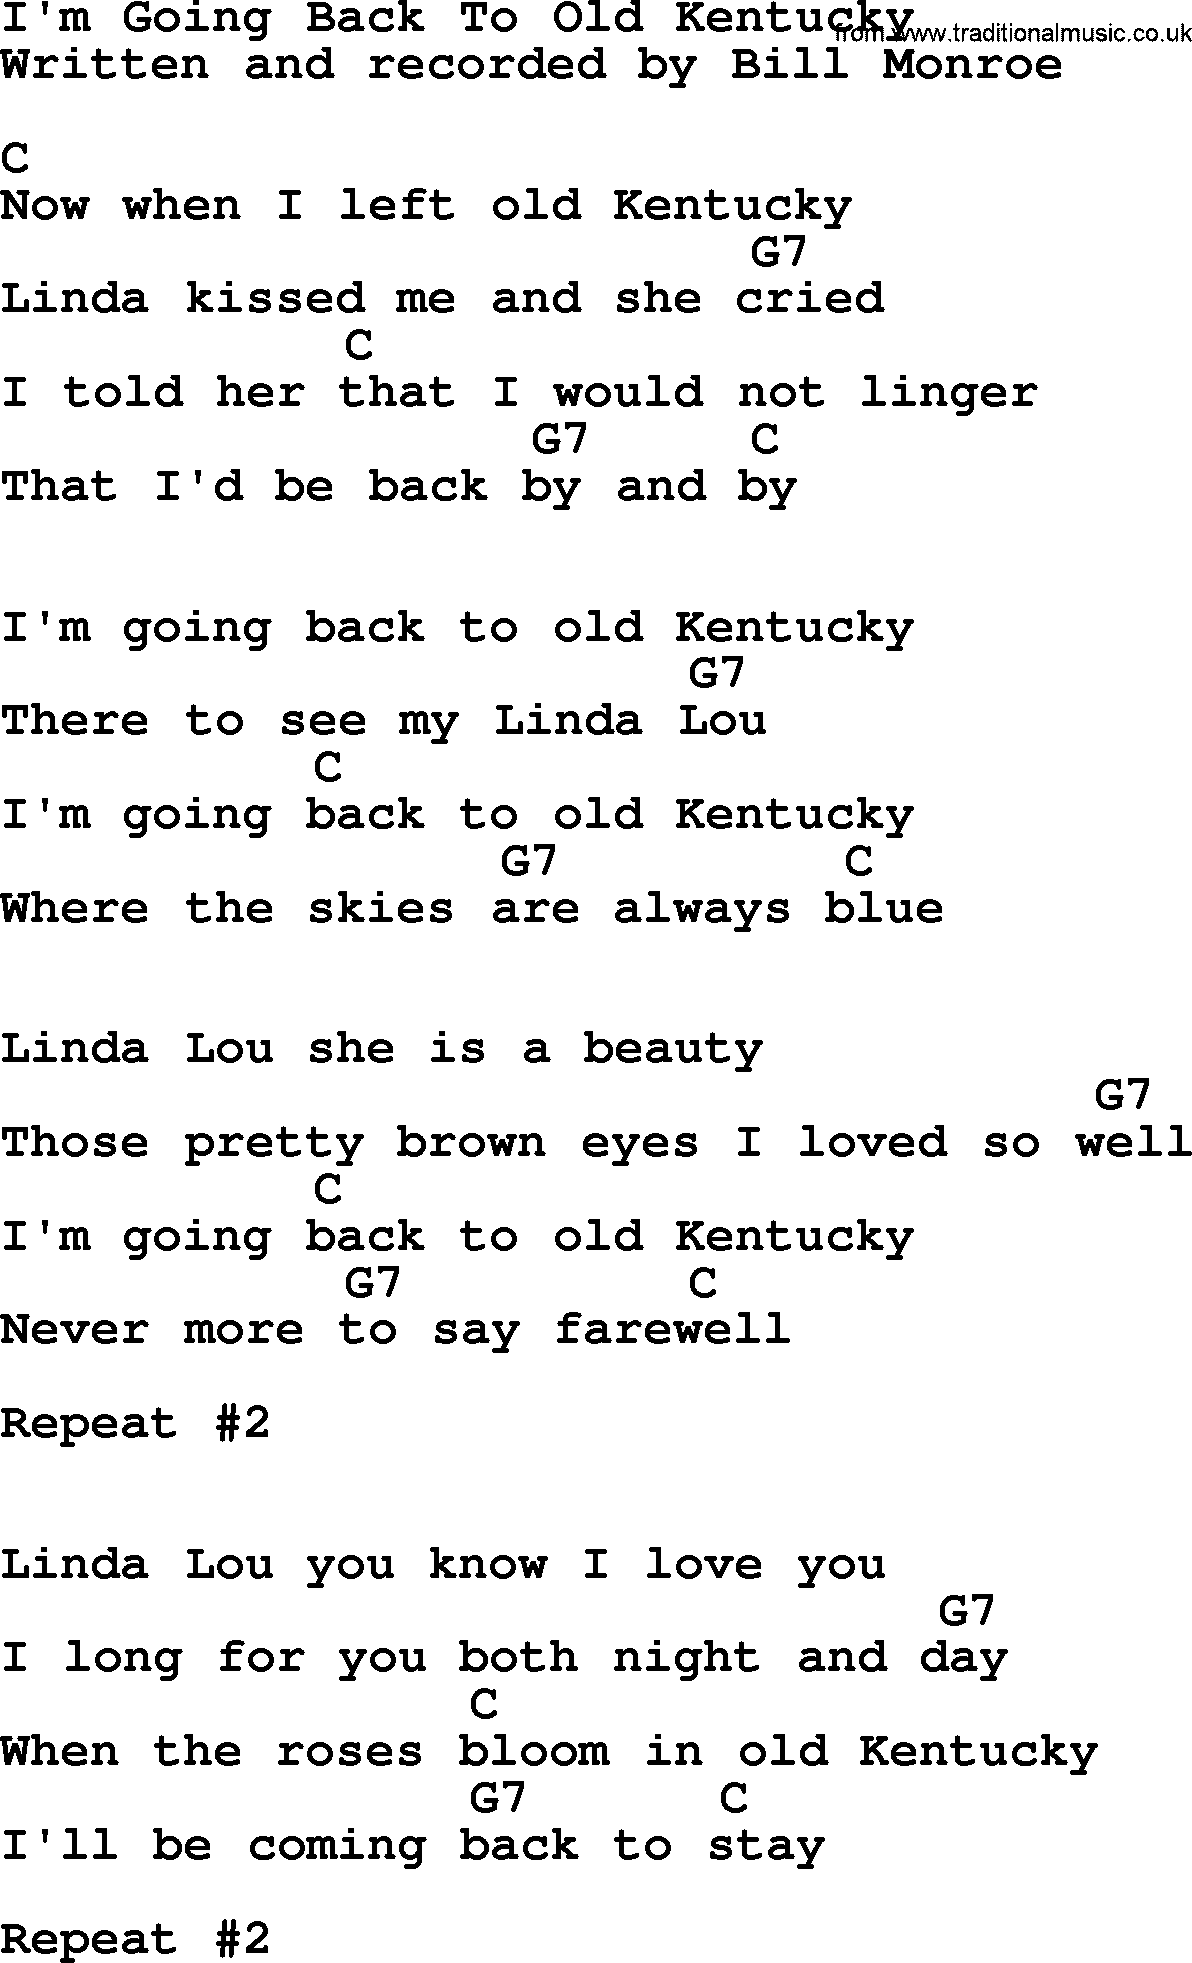 Im Going Back To Old Kentucky Bluegrass Lyrics With Chords 